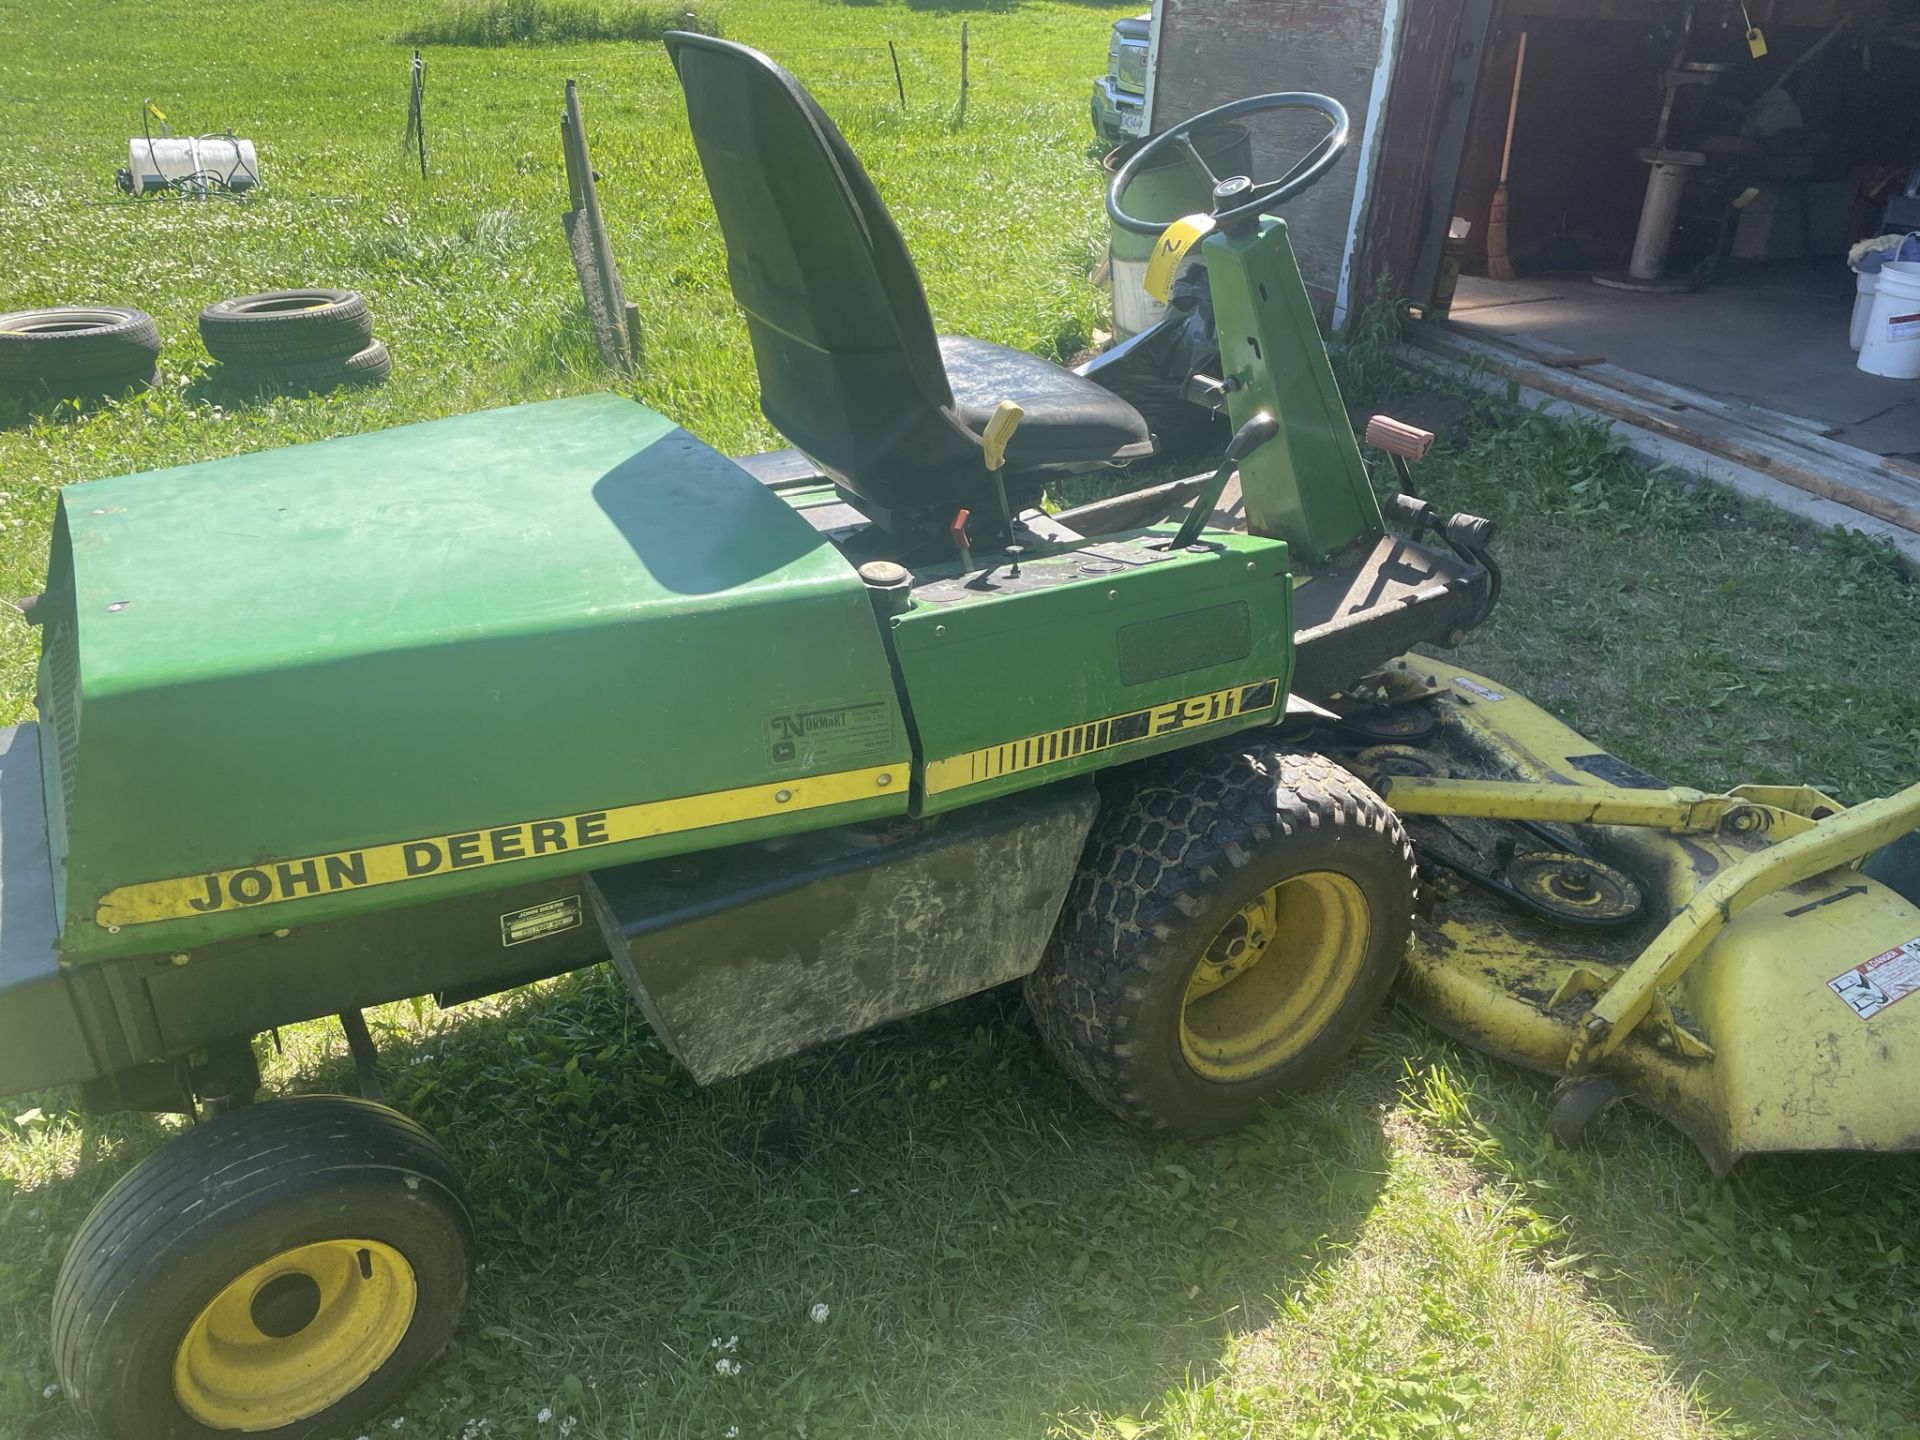 JOHN DEERE F911 FRONT MOUNT LAWN MOVER W/ 60” DECK, 2,286 HR SHOWING, S/N M0F911X100545 - Image 4 of 8